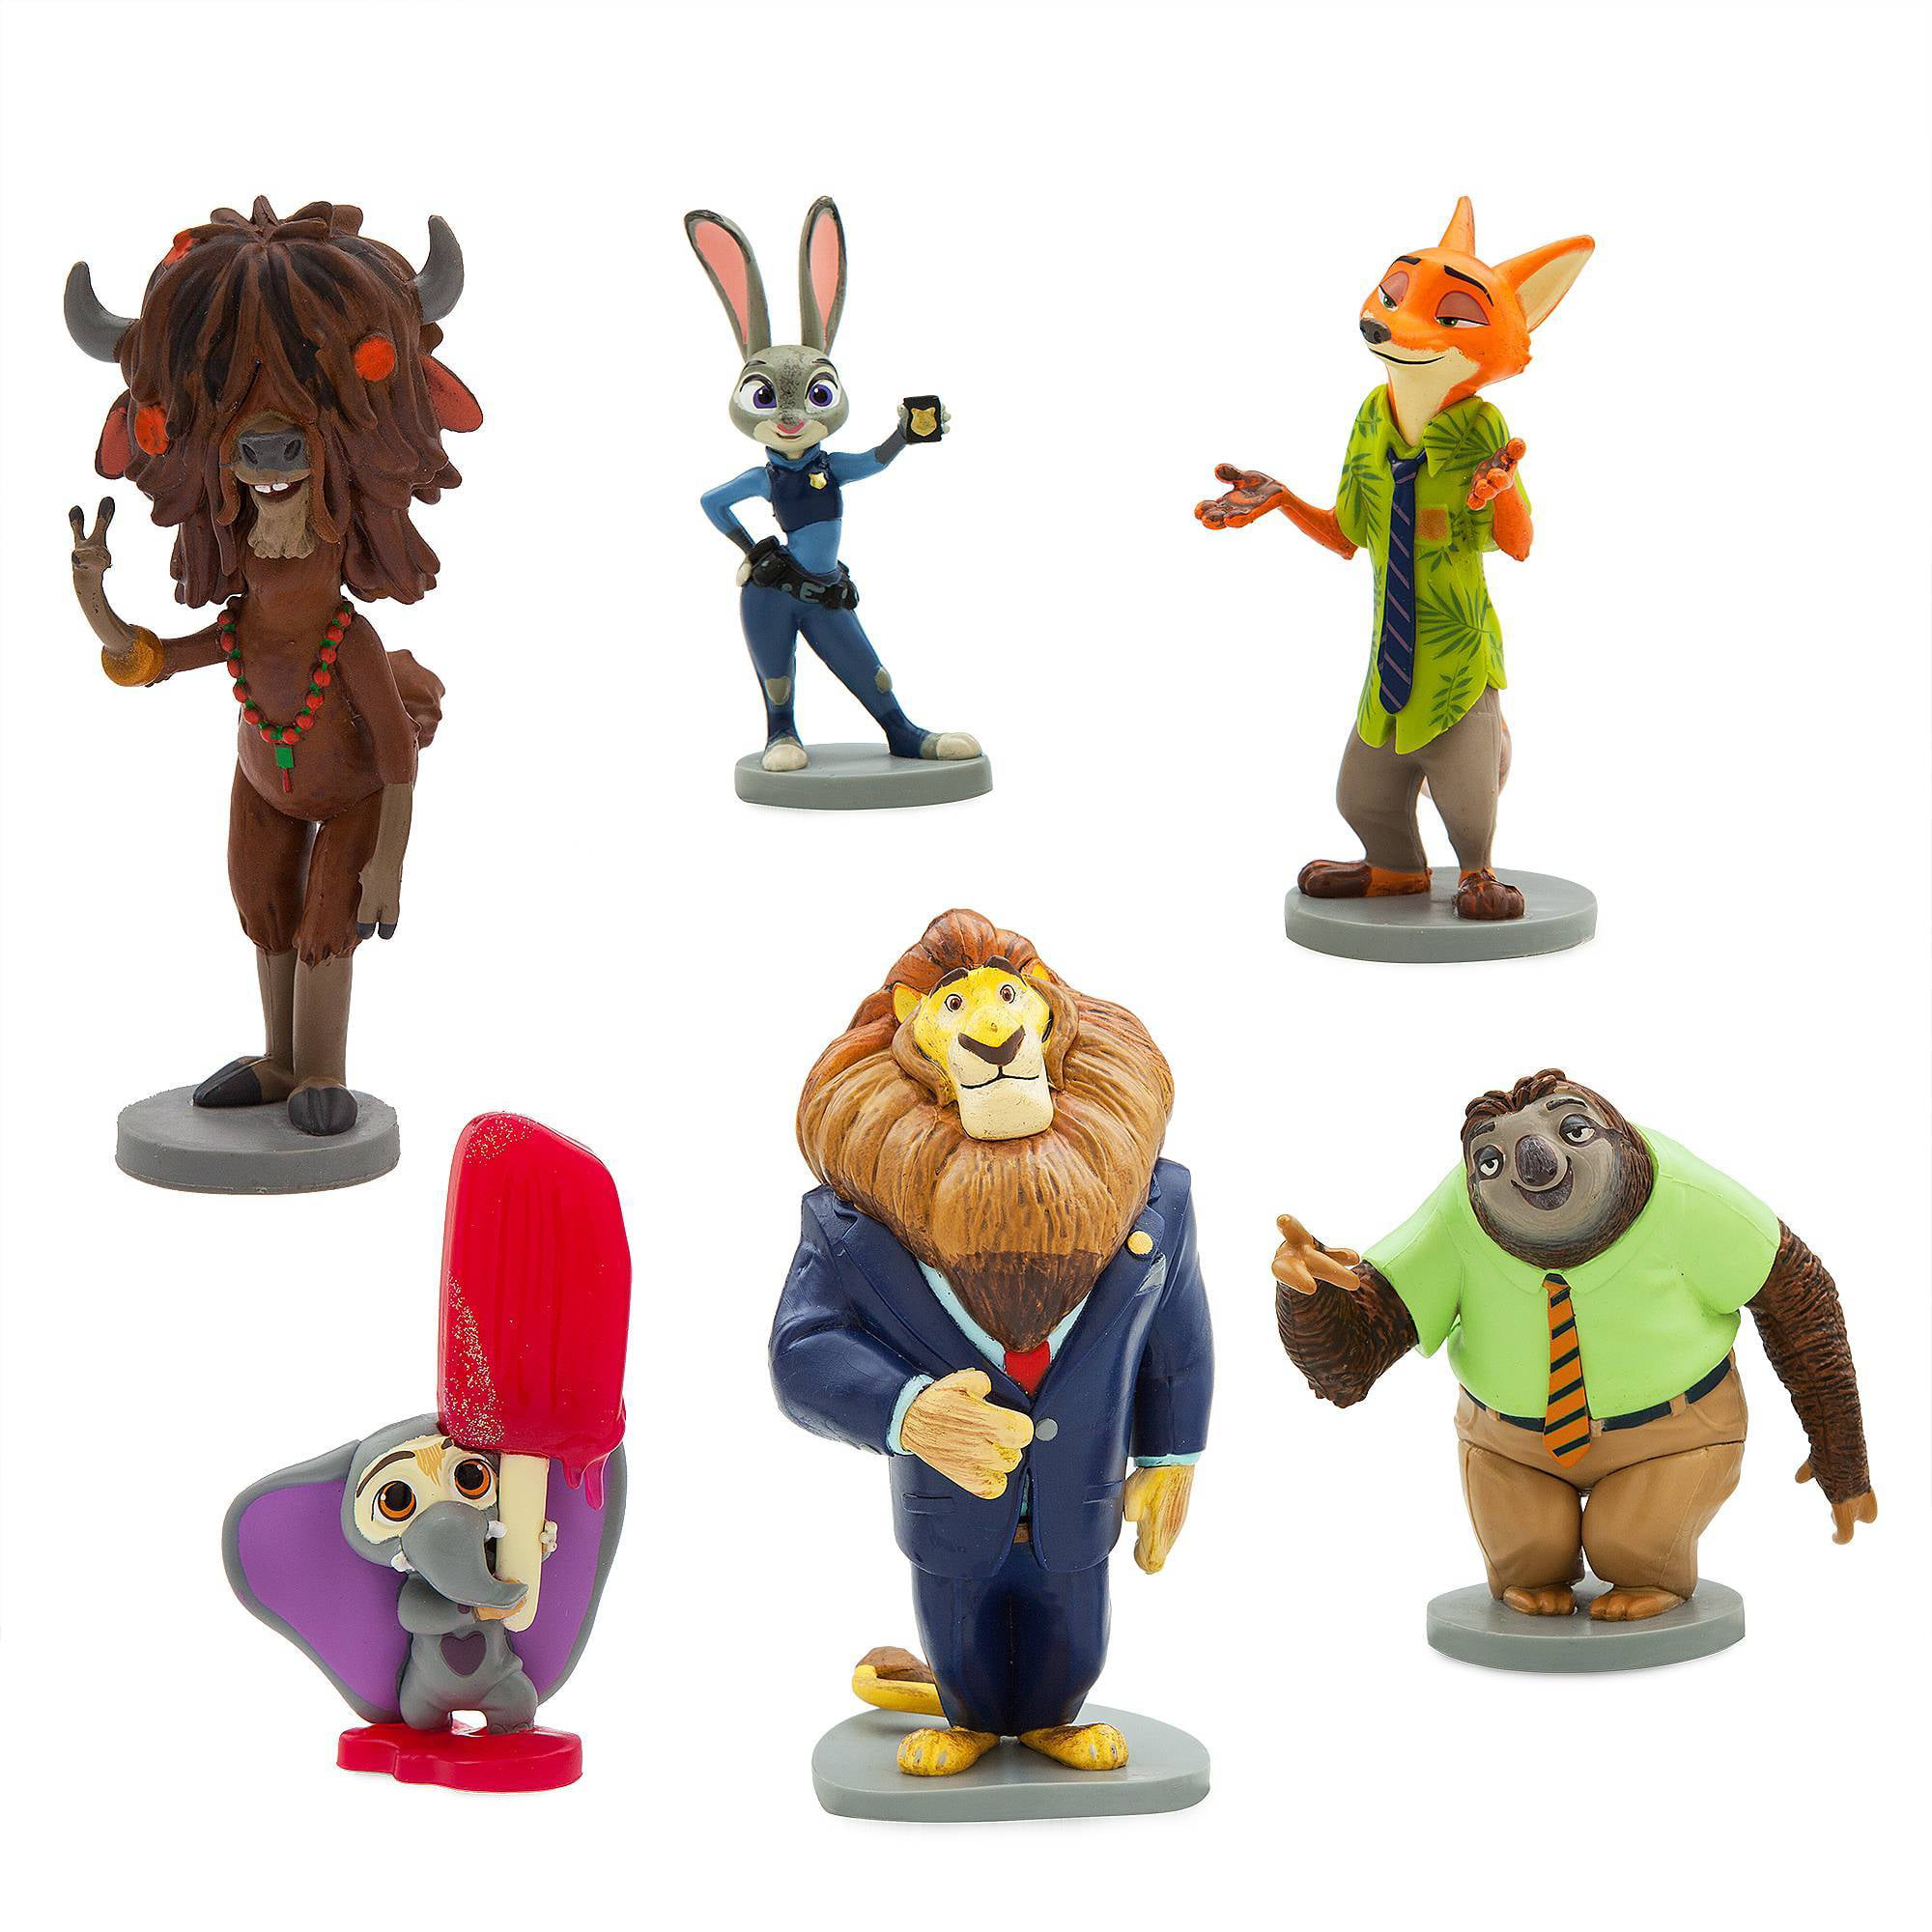 12pcs Zootopia Action Figure Judy Hopps Figurine Doll Play set Toy cake topper 